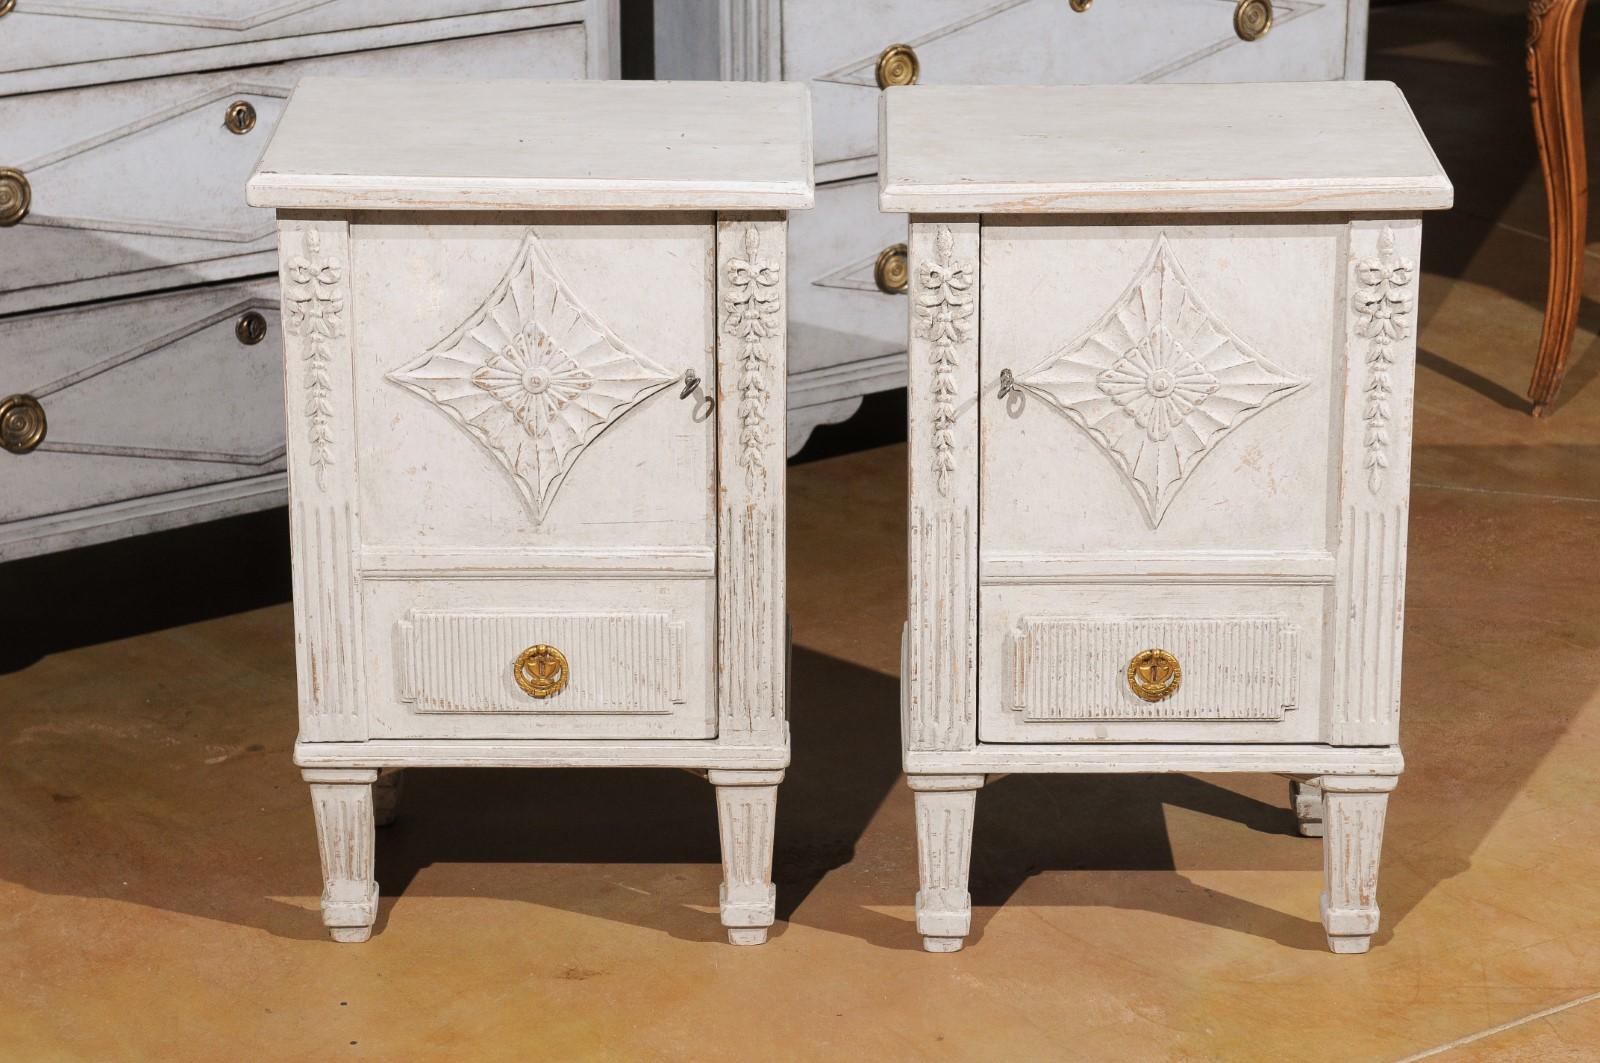 20th Century Pair of Swedish Neoclassical Style Painted Nightstand Cabinets with Single Door